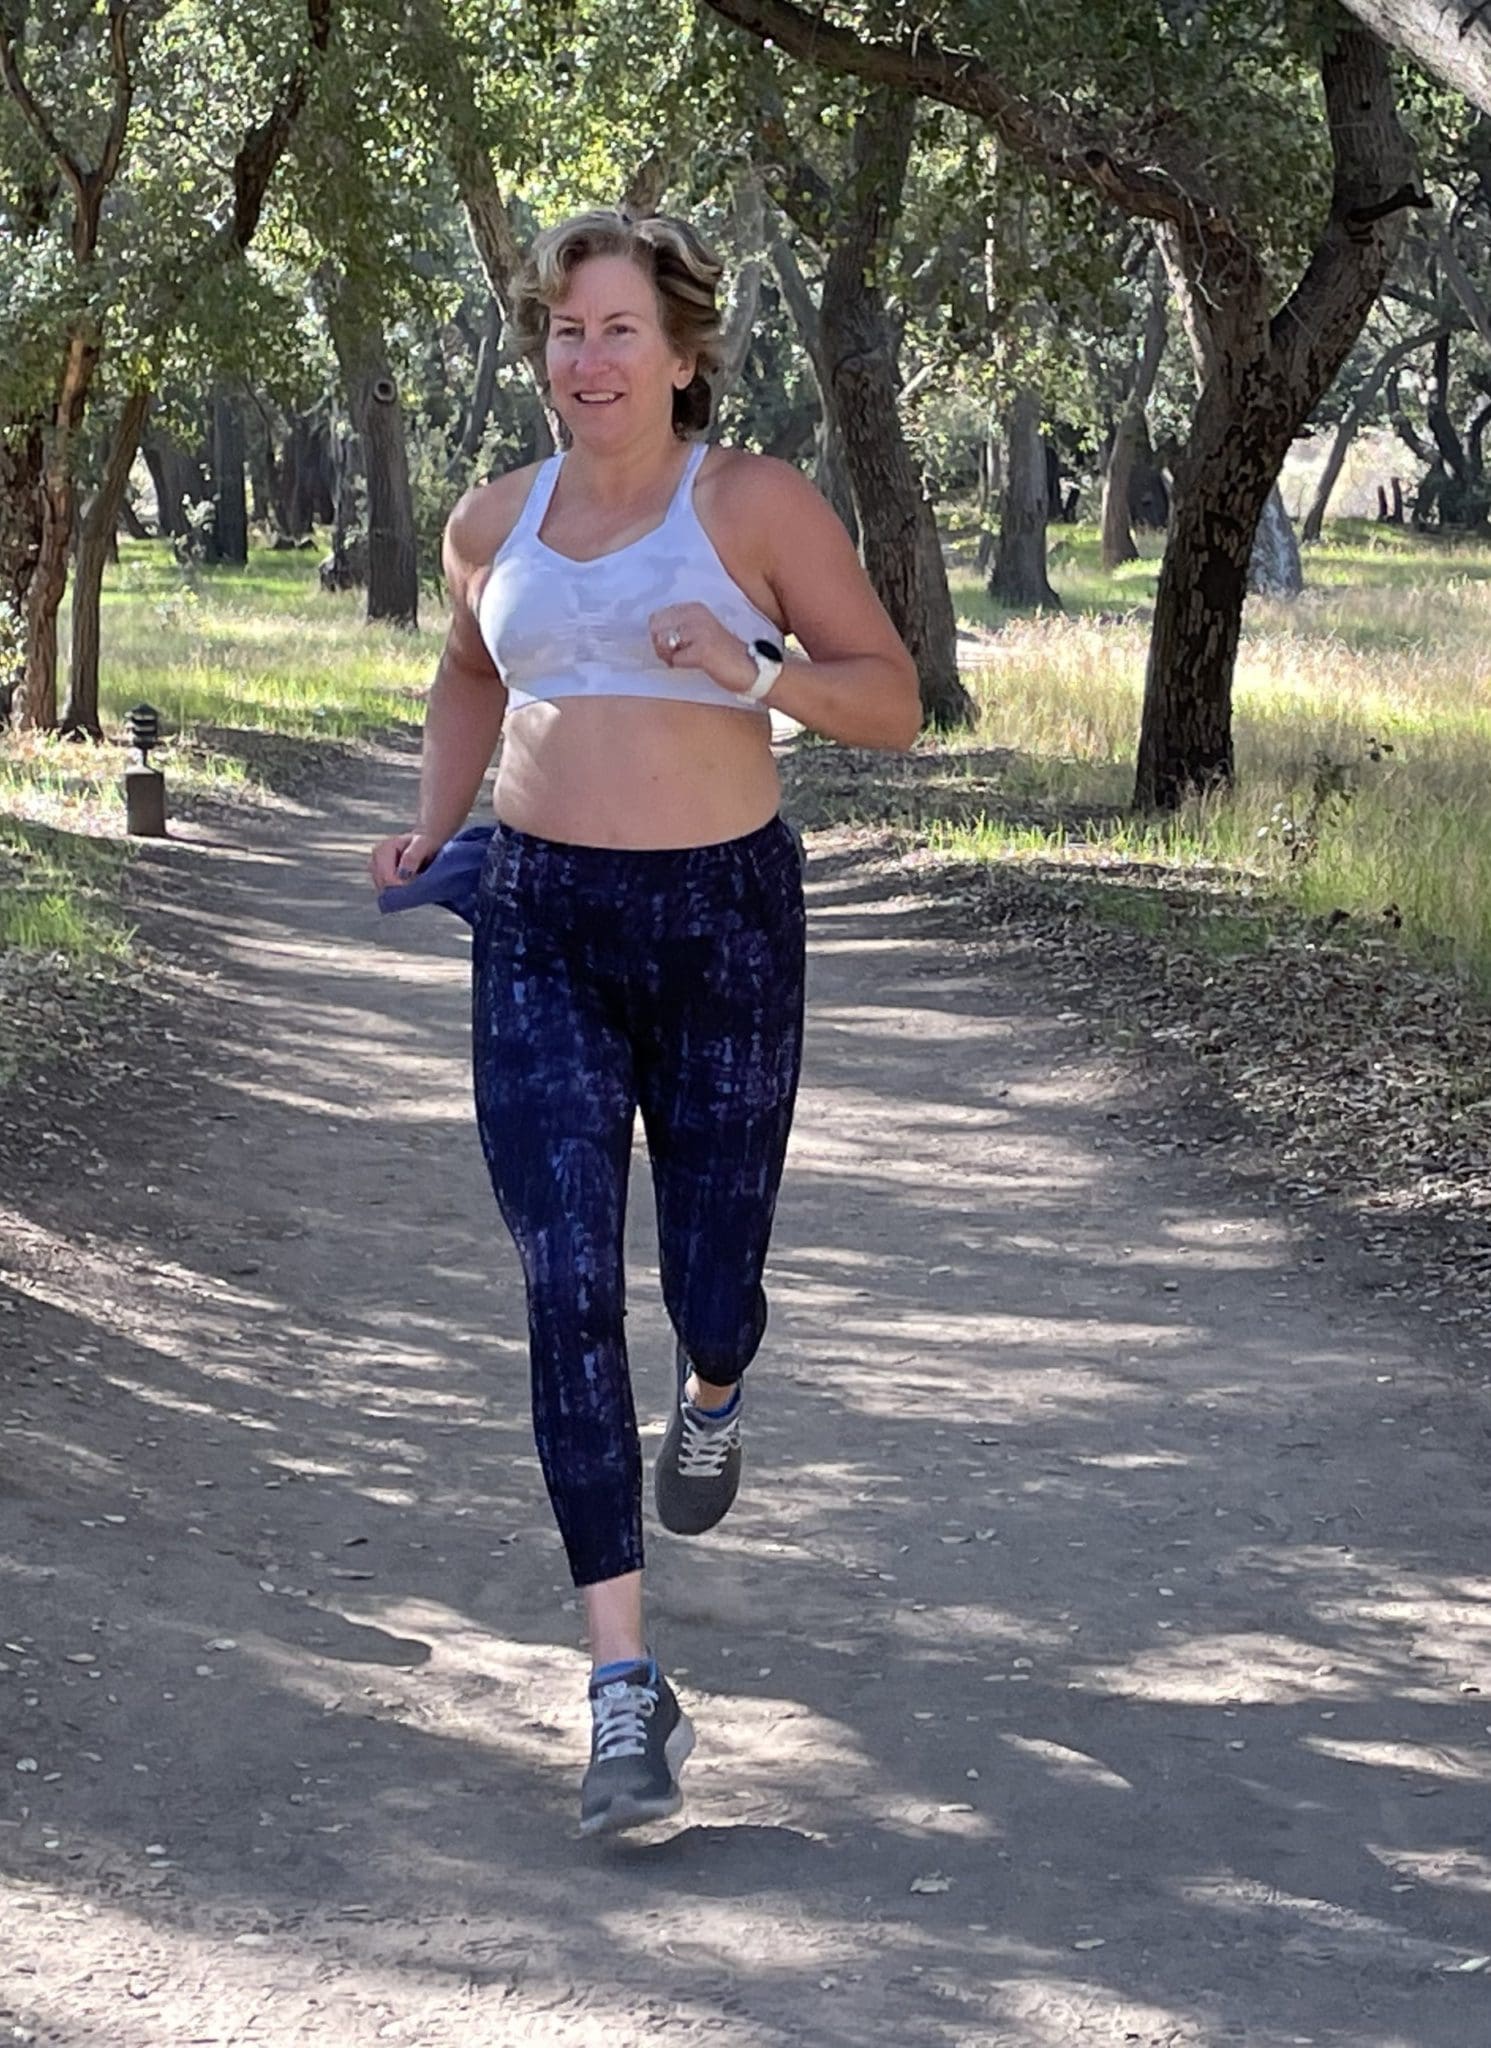 https://anothermotherrunner.com/wp-content/uploads/2023/06/Sarah-running-on-trail-in-Handful-bra-both-feet-off-ground-vertical-GREAT-scaled.jpg